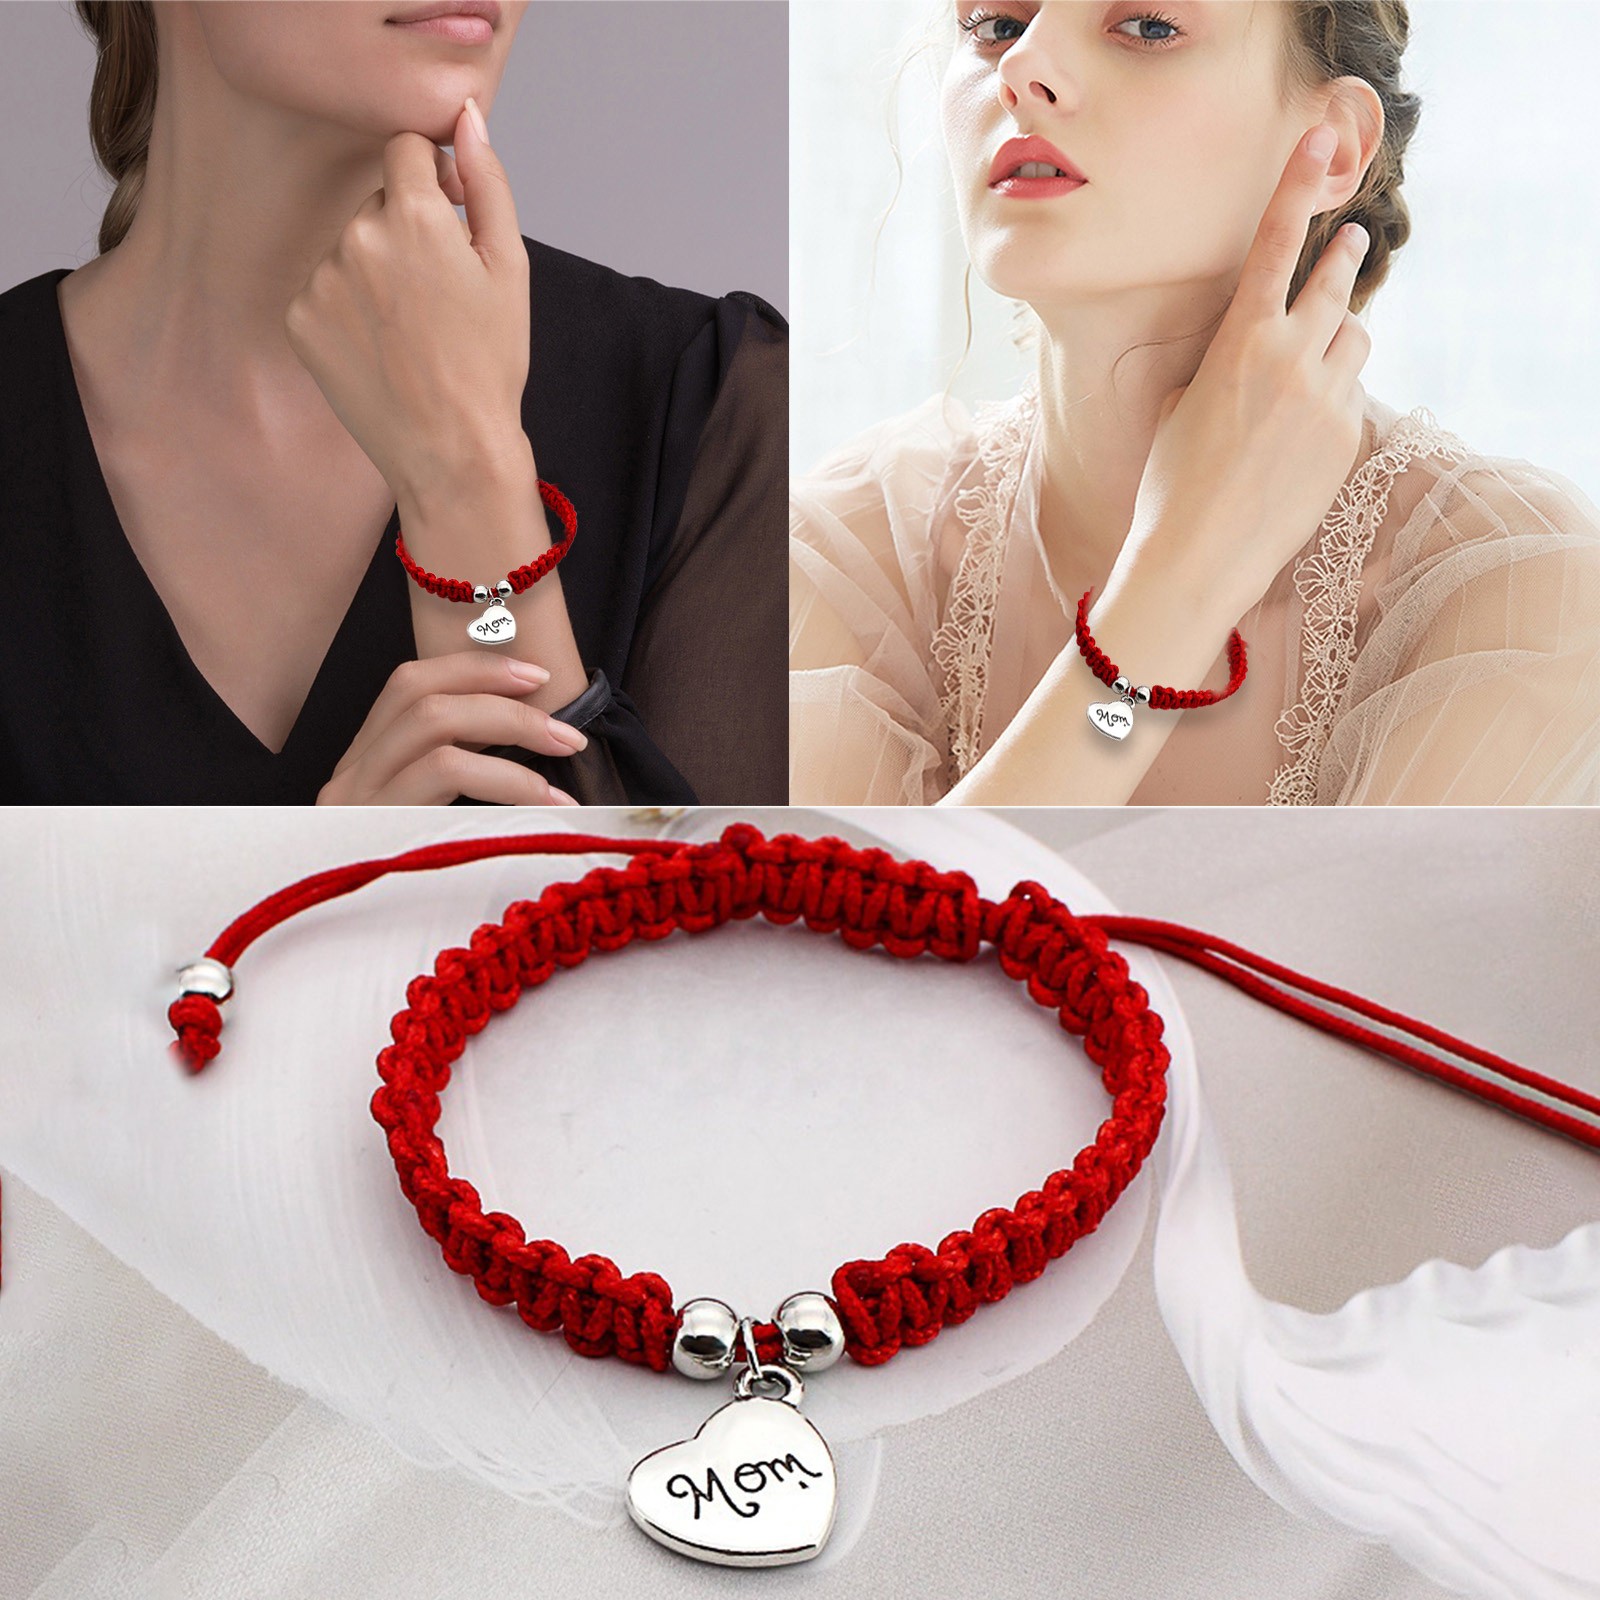 Bracelets in Jewelry Mother's Day Gift Simple Handwoven MOM Bracelet Red  Rope Bracelet Bracelets for Women 